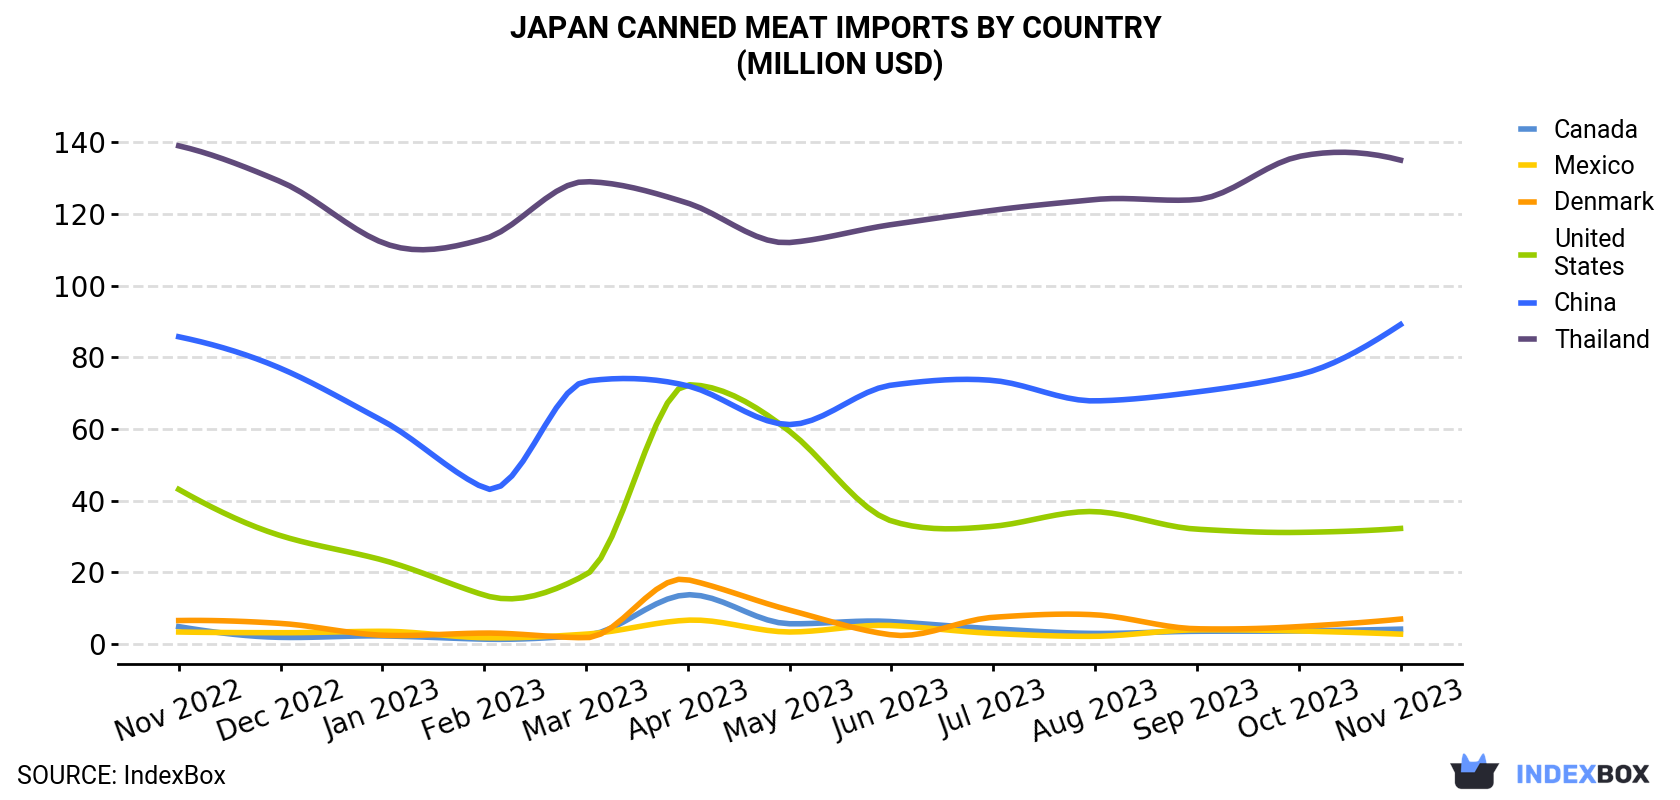 Japan Canned Meat Imports By Country (Million USD)